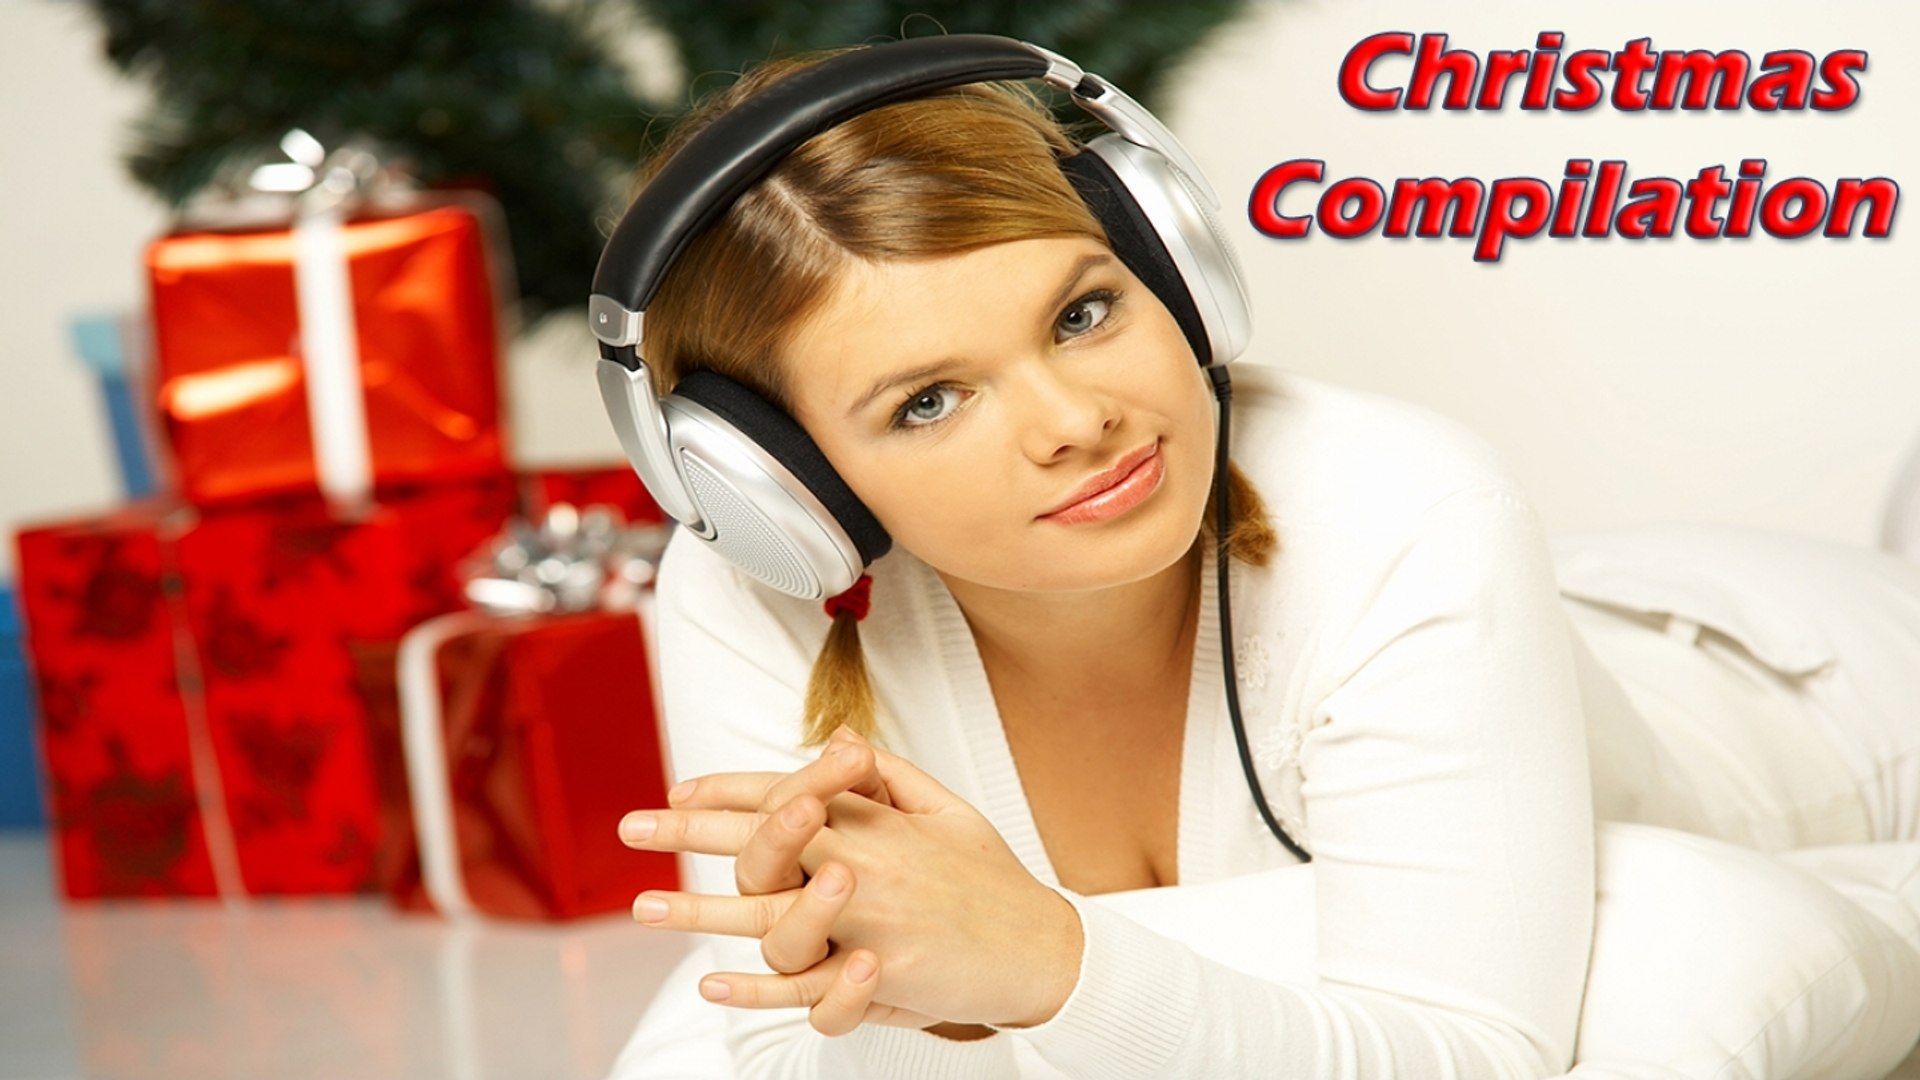 VA - The Best Christmas Playlist 2017. Top Christmas Songs #Relaxing Christmas Music